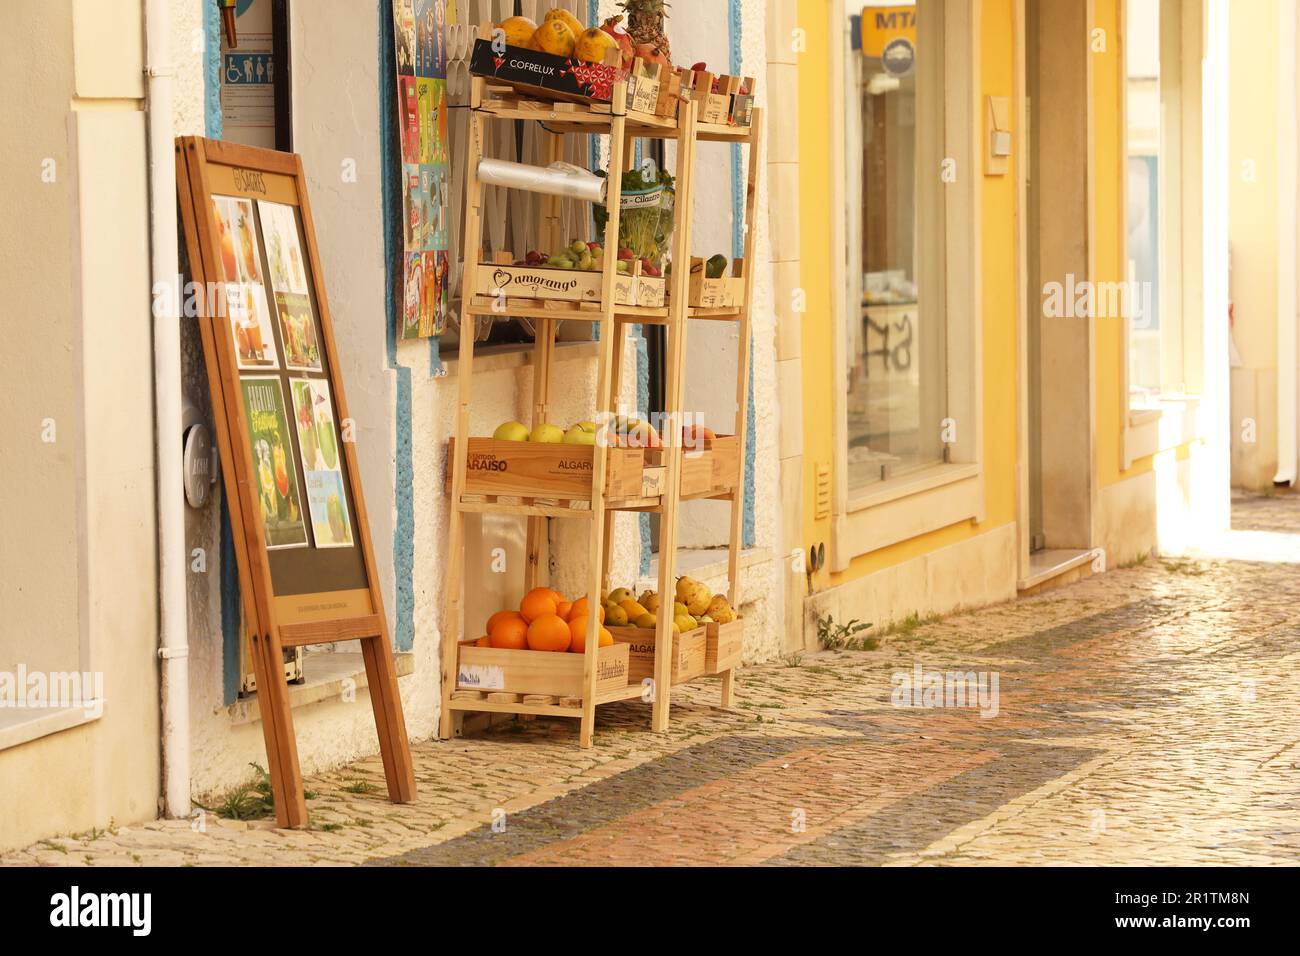 A small grocery shop, Old Town, Lagos, Algarve, Portugal Stock Photo